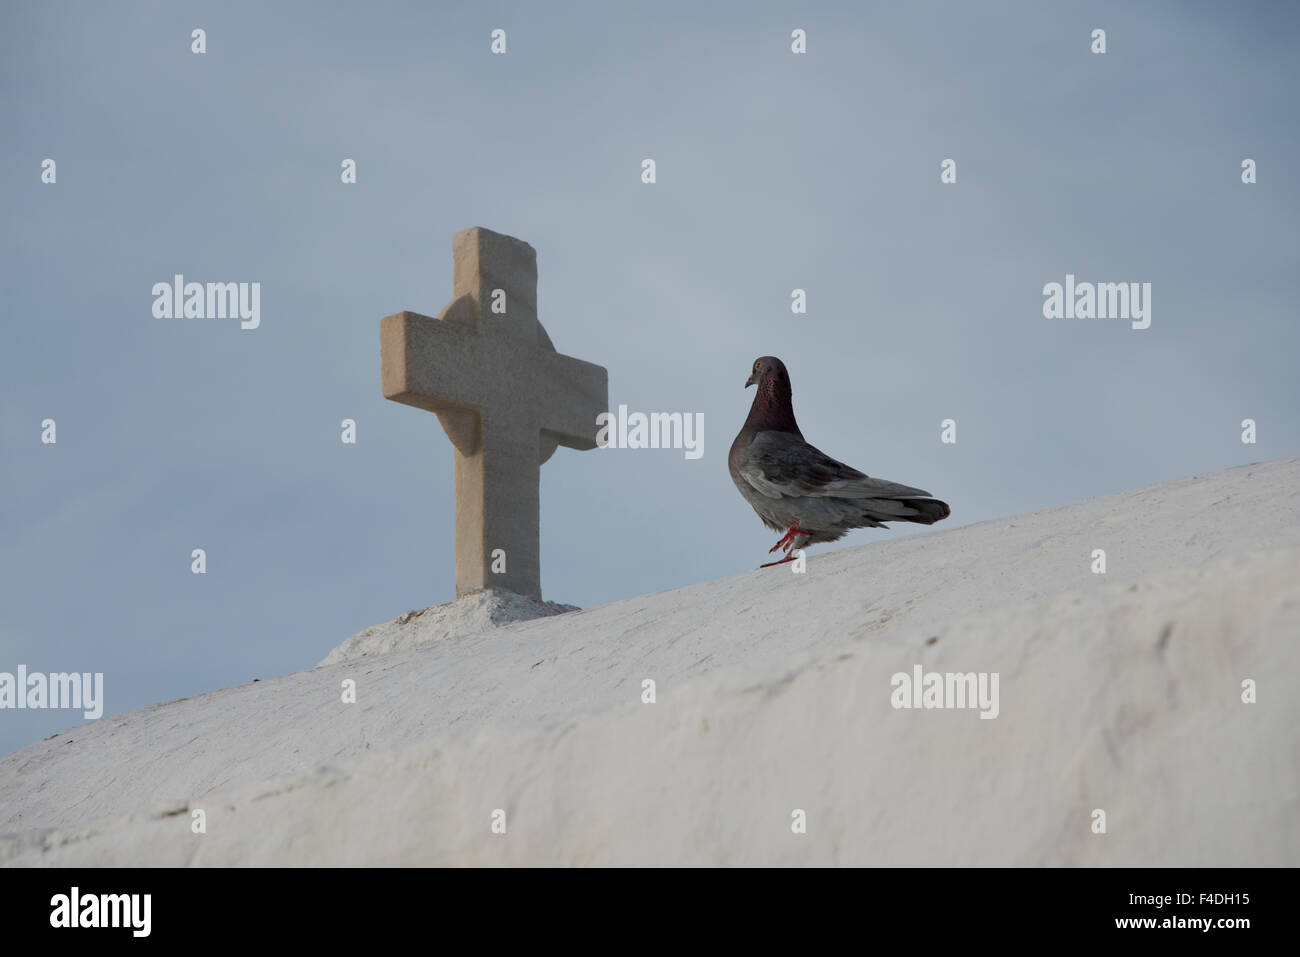 Greece, Cyclades, Mykonos, Hora. Pigeon on typical whitewashed church rooftop showing traditional Cycladic architecture. (Large format sizes available). Stock Photo